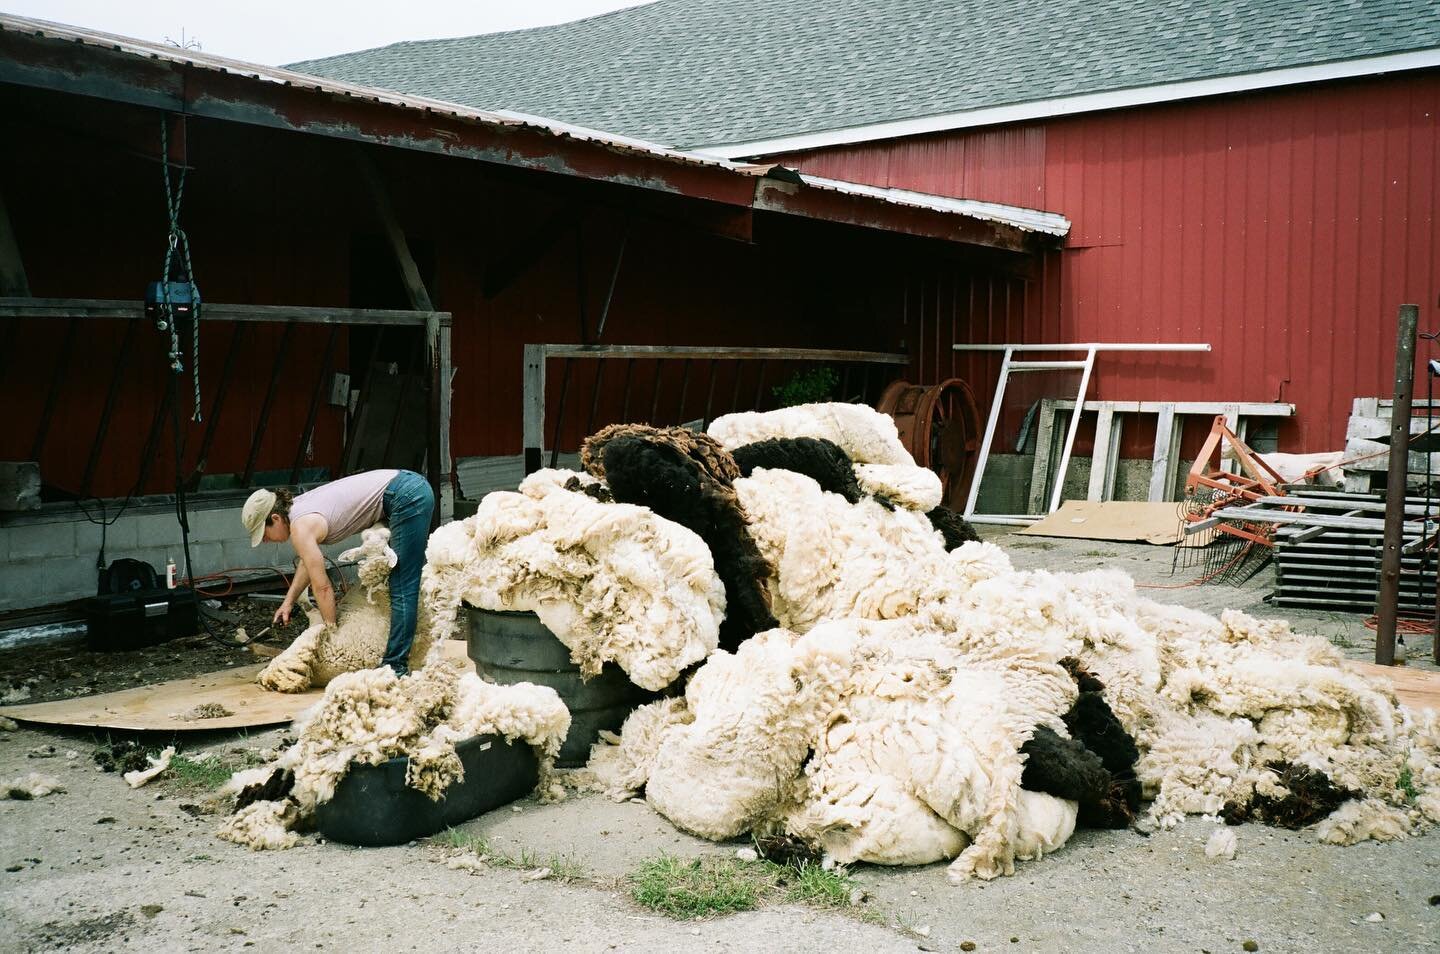 ⁣Shearing sheep is always better when you shear with your friends. Grateful for my friend and shearing partner @glenwoodk⠀
We just need @strawsfarm here to make the dream shearing team! ⠀
⠀
⠀
#sheepshearingmaine #mainesheep  #farmingwithfilm